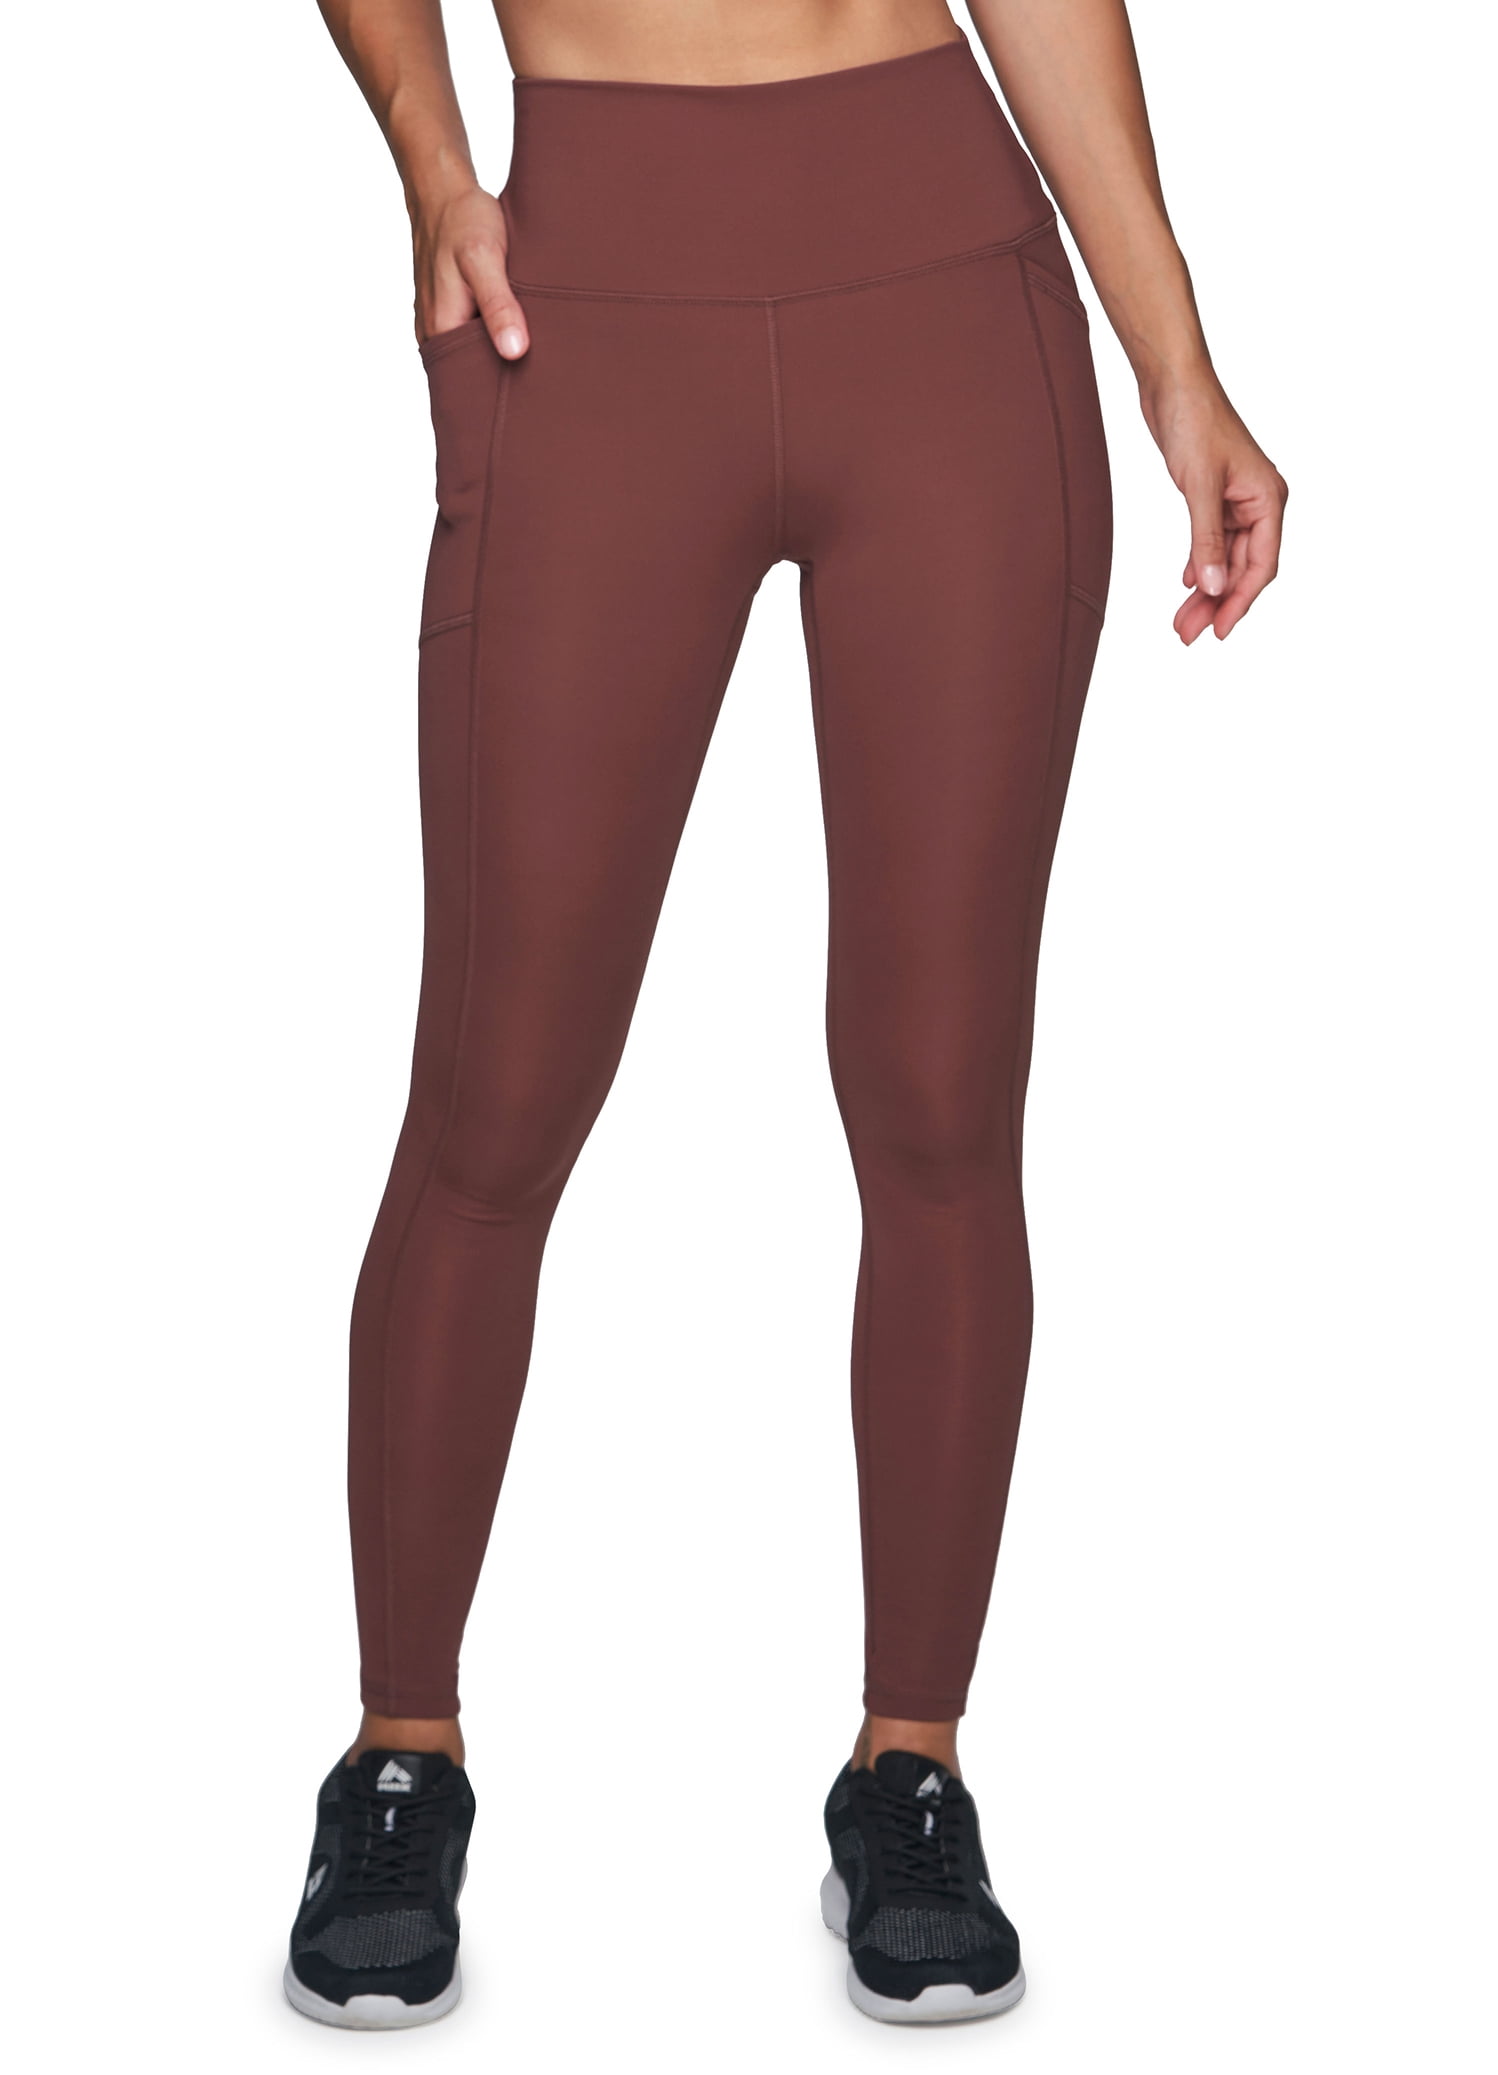  RBX Women's Buttery Soft Squat Proof Legging Space Dye Legging  Heathered Brown XS : Sports & Outdoors